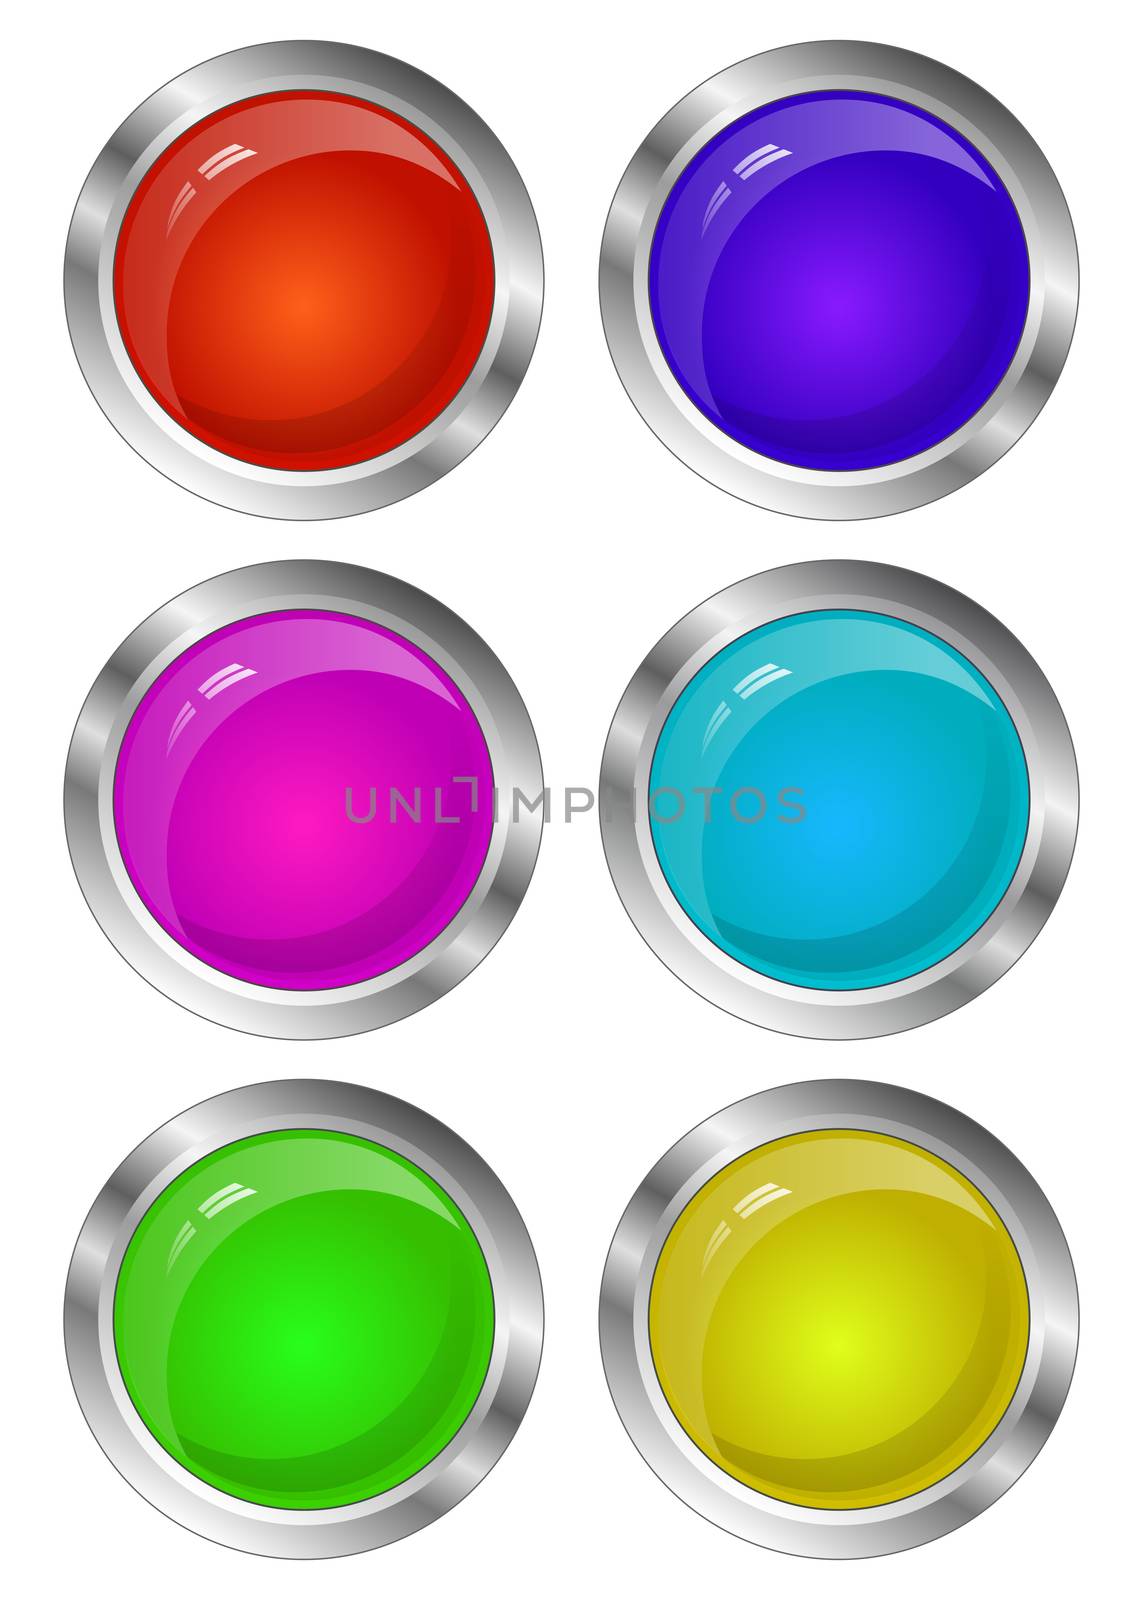 Blank Glossy Round 3D Button Set. Collection. illustration